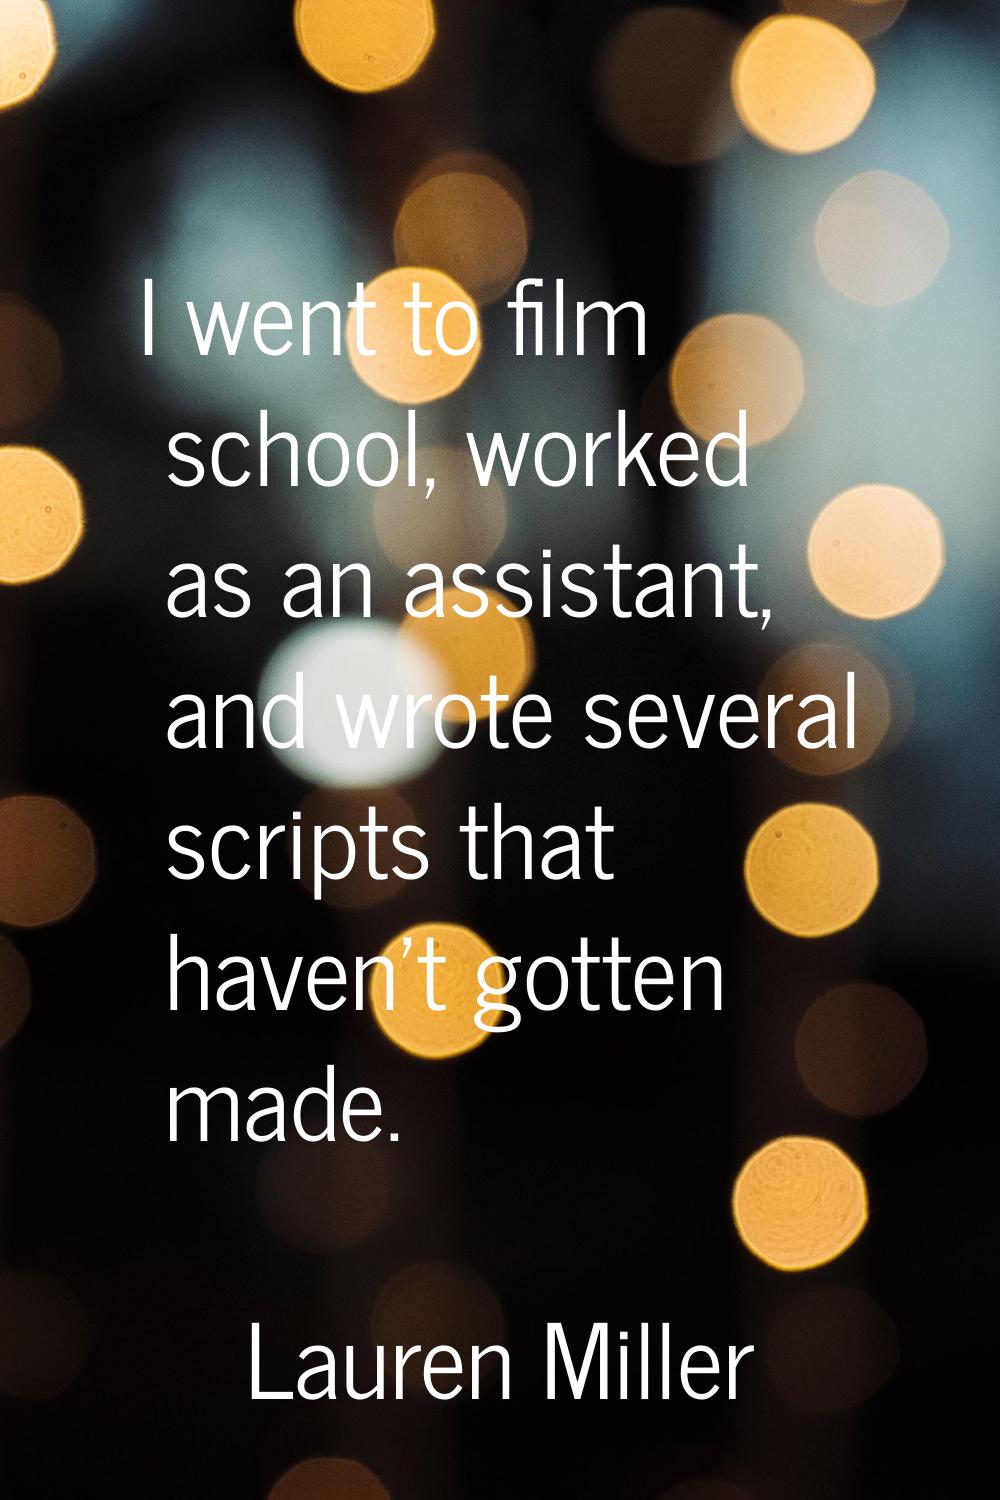 I went to film school, worked as an assistant, and wrote several scripts that haven't gotten made.